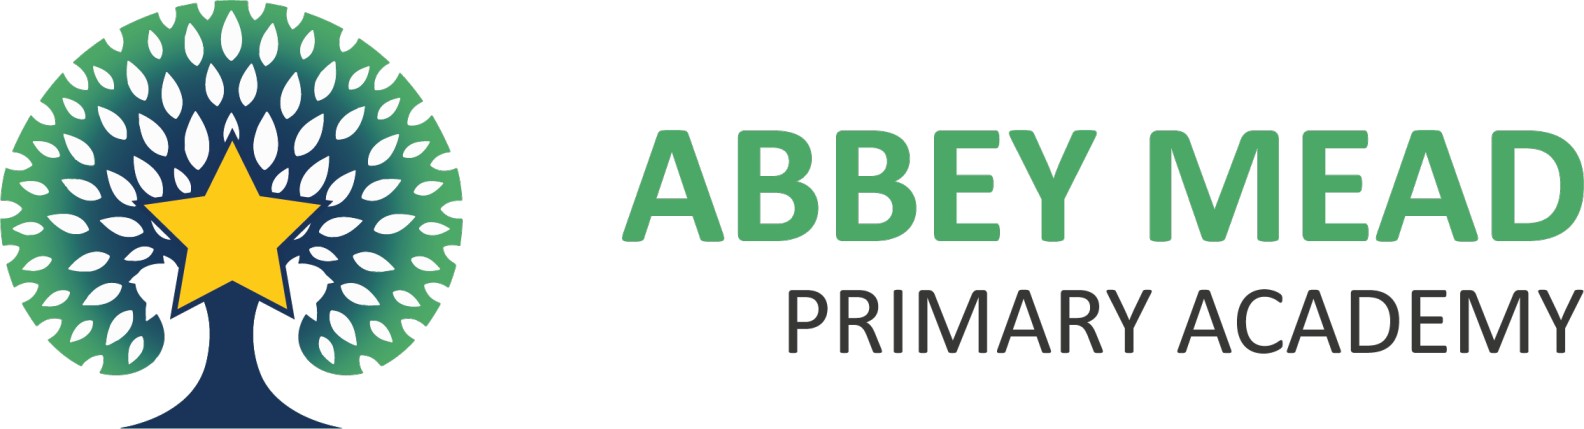 Abbey Mead Primary Academy